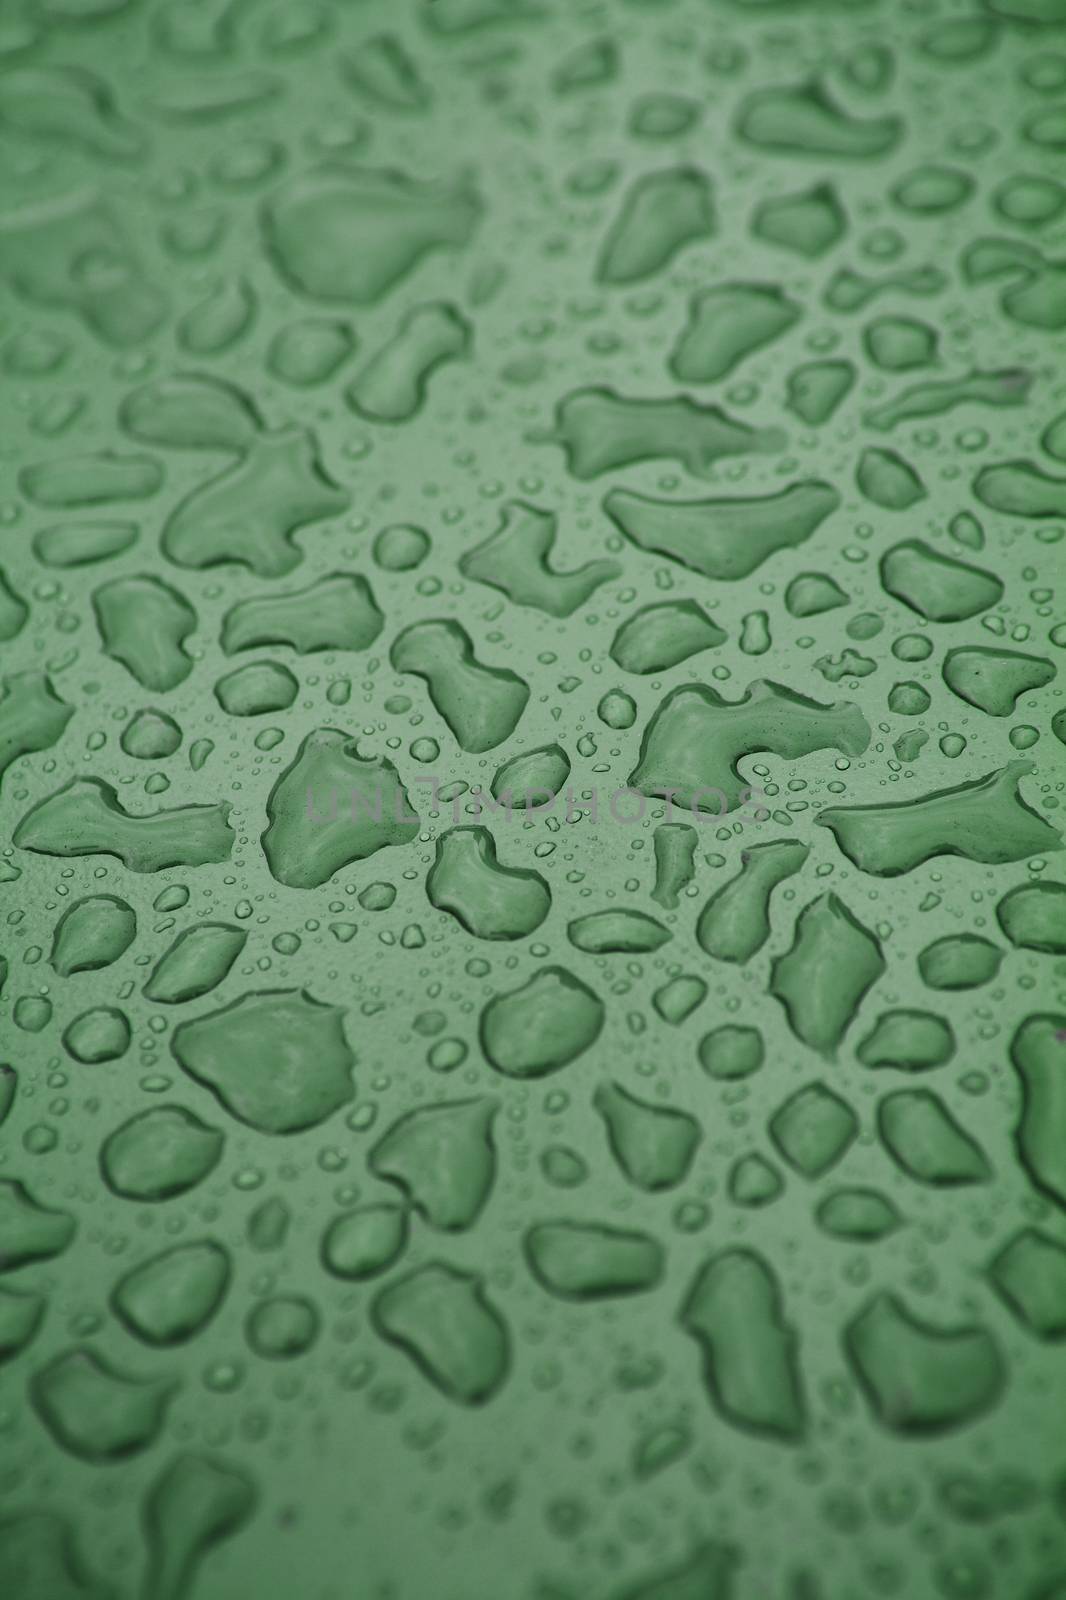 Water drops on green background by gemenacom